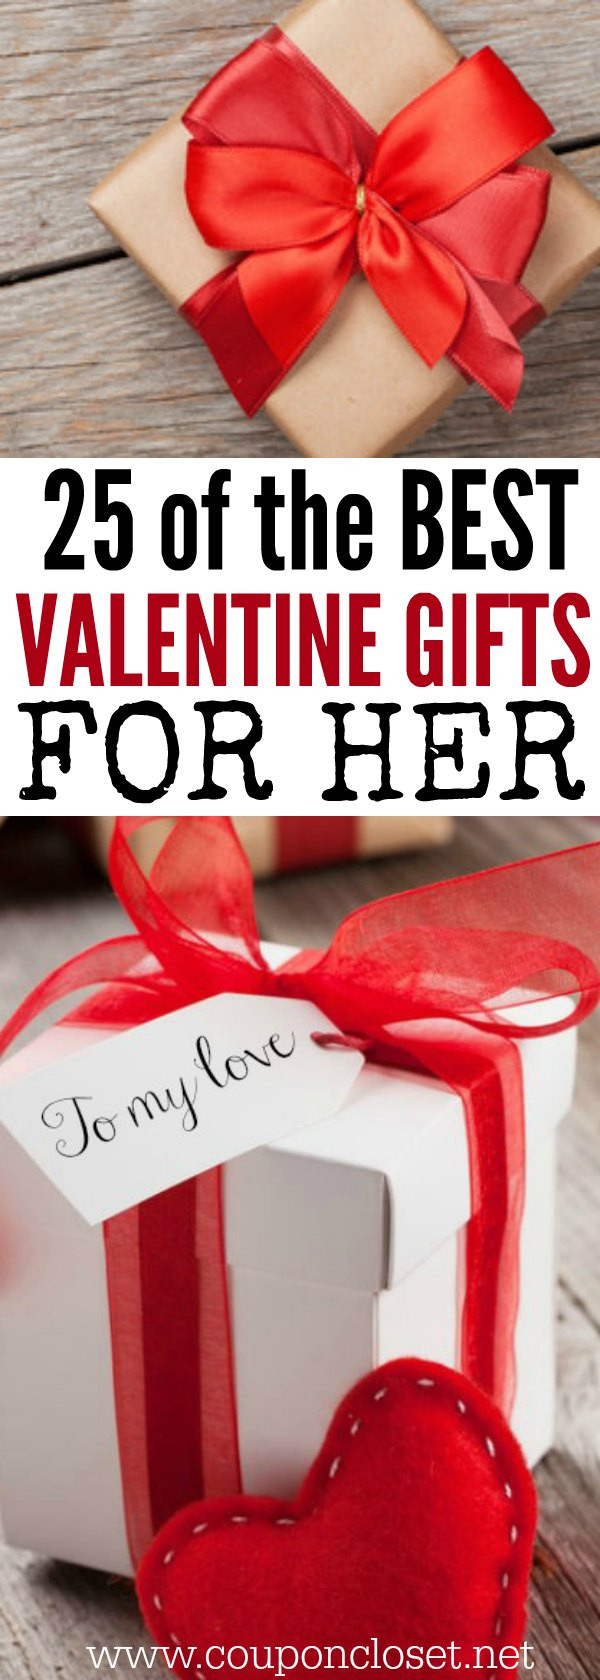 Gift Ideas For Her On Valentine'S Day
 25 Valentine s Day ts for Her on a bud  Coupon Closet